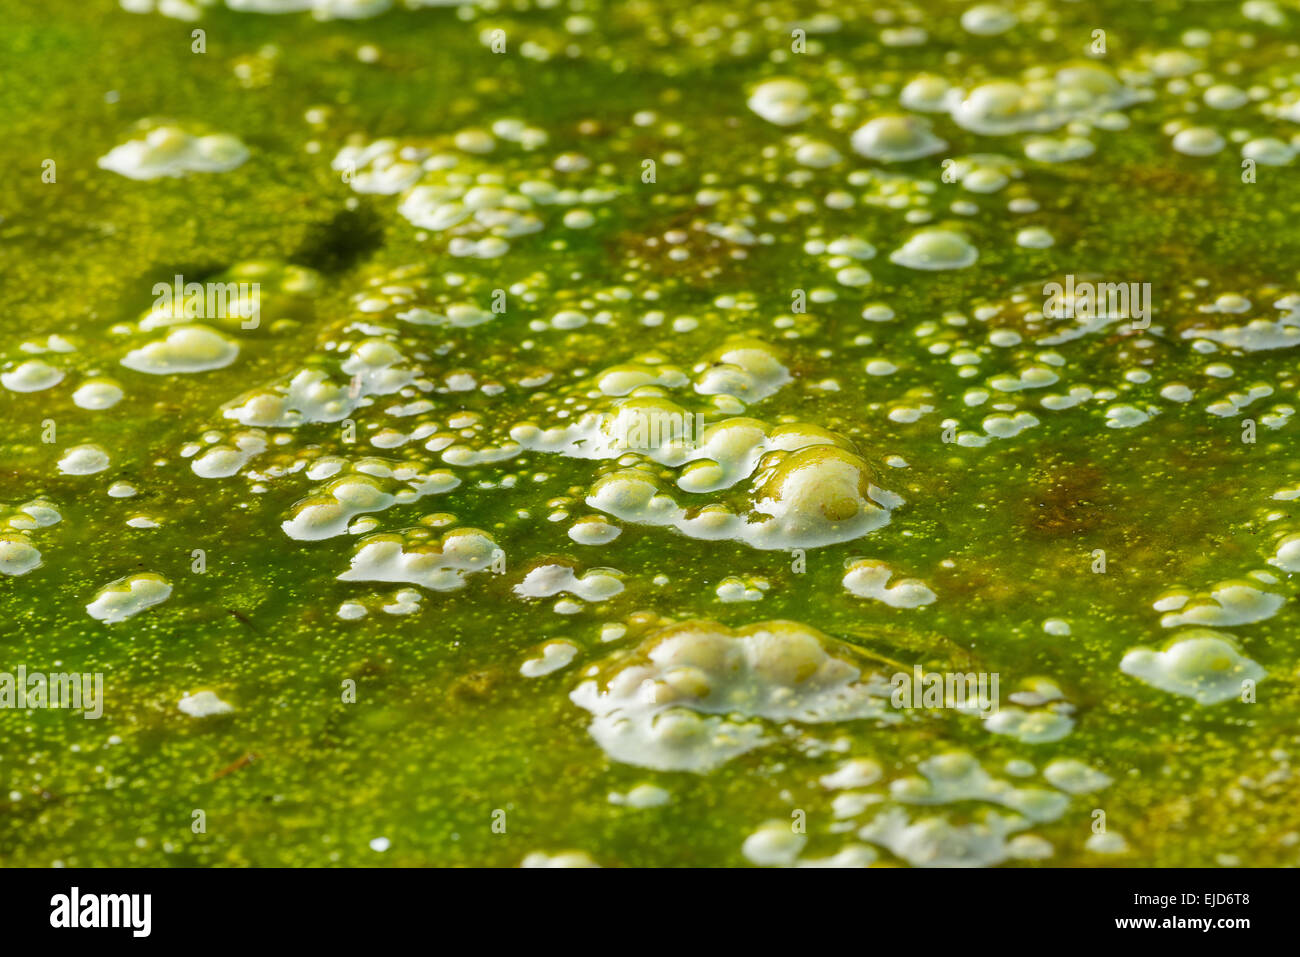 dense covering of bright filamentous green alga algae with masses of trapped bubbles oxygen gas methane rotting vegetation below Stock Photo